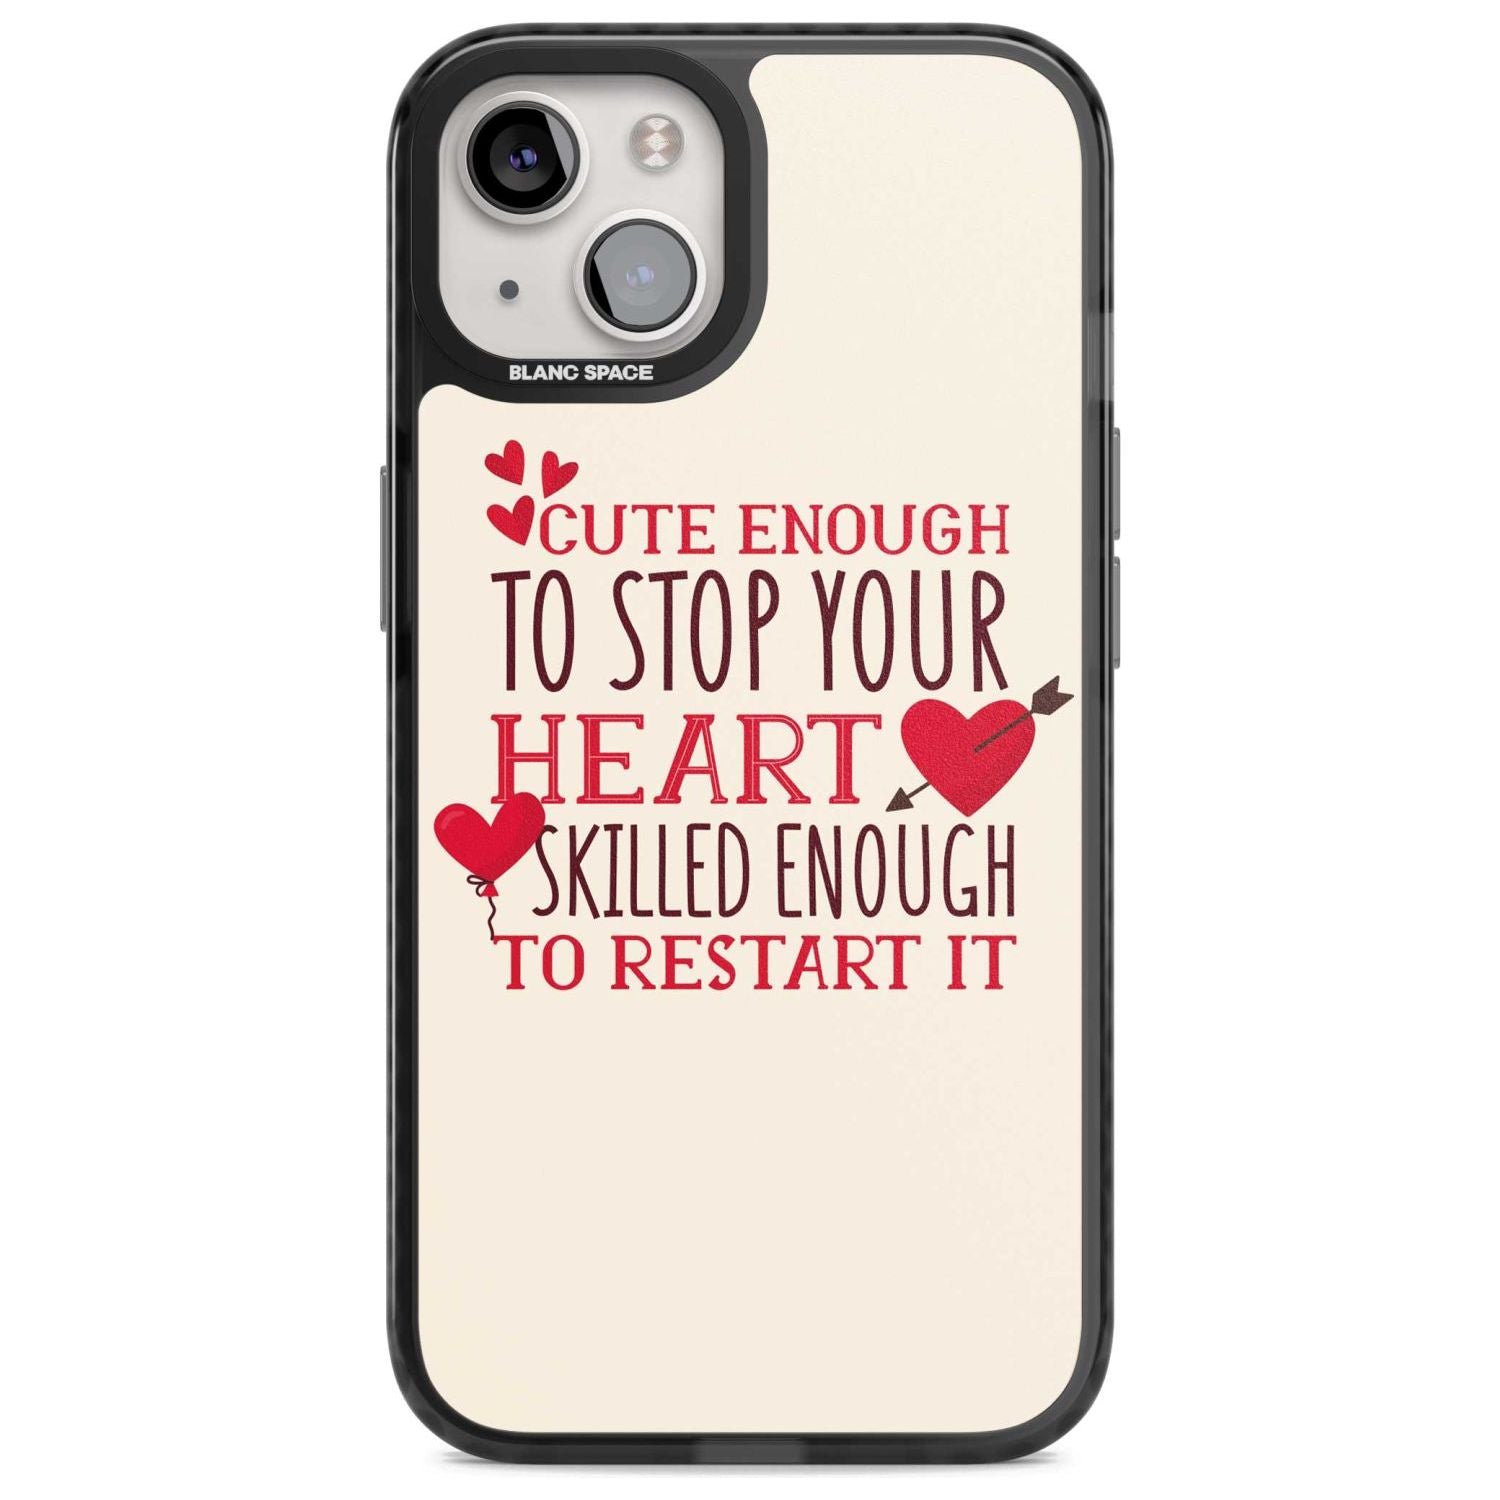 Medical Design Cute Enough to Stop Your Heart Phone Case iPhone 15 Plus / Magsafe Black Impact Case,iPhone 15 / Magsafe Black Impact Case,iPhone 14 Plus / Magsafe Black Impact Case,iPhone 14 / Magsafe Black Impact Case,iPhone 13 / Magsafe Black Impact Case Blanc Space